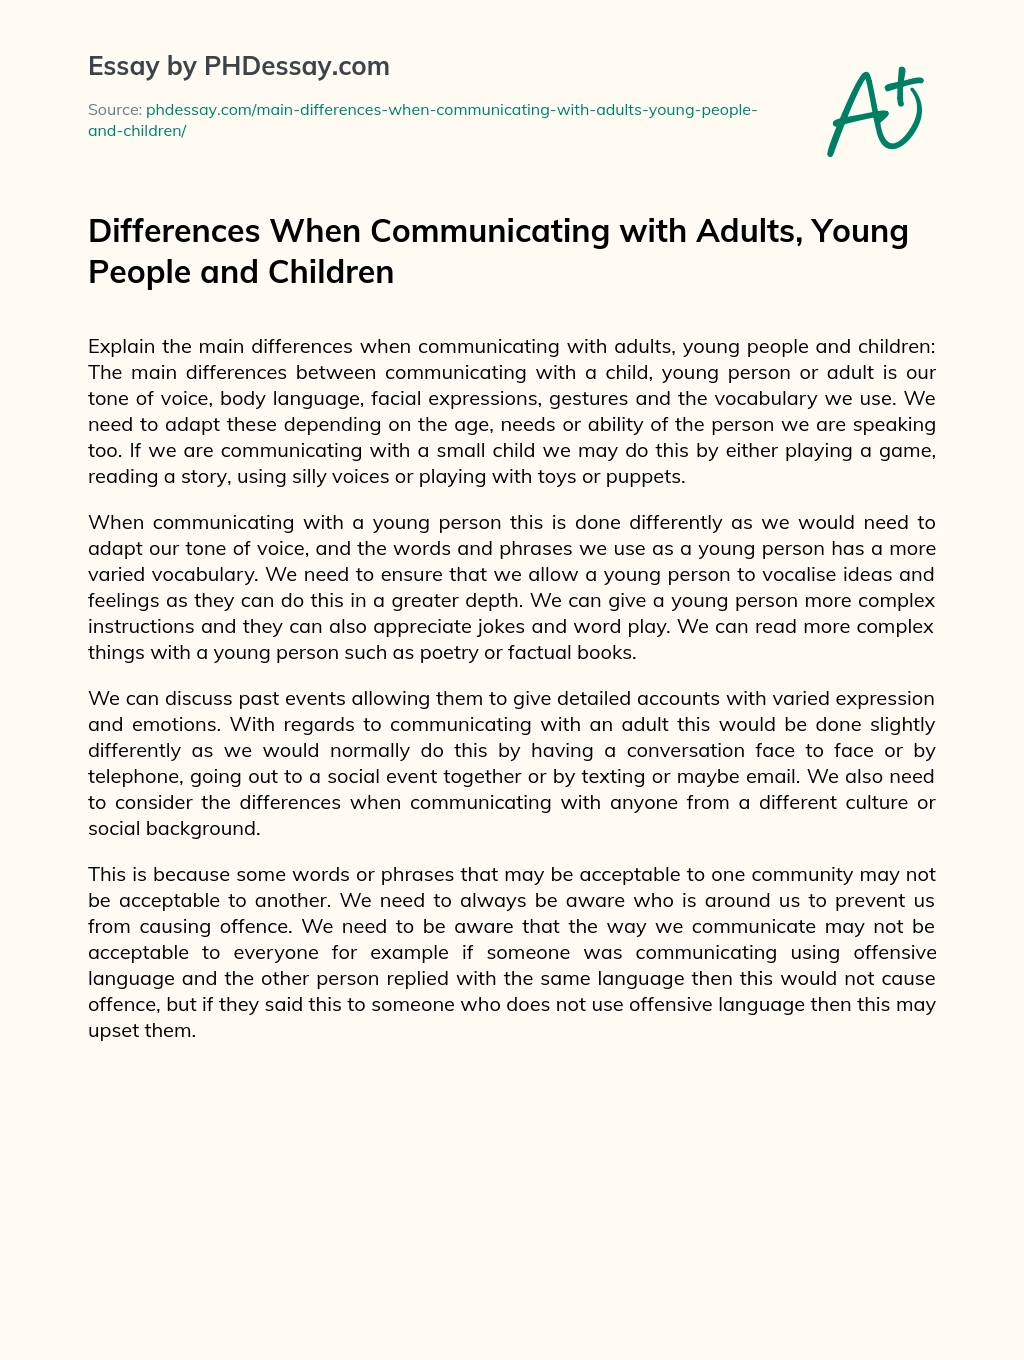 Differences When Communicating with Adults, Young People and Children essay